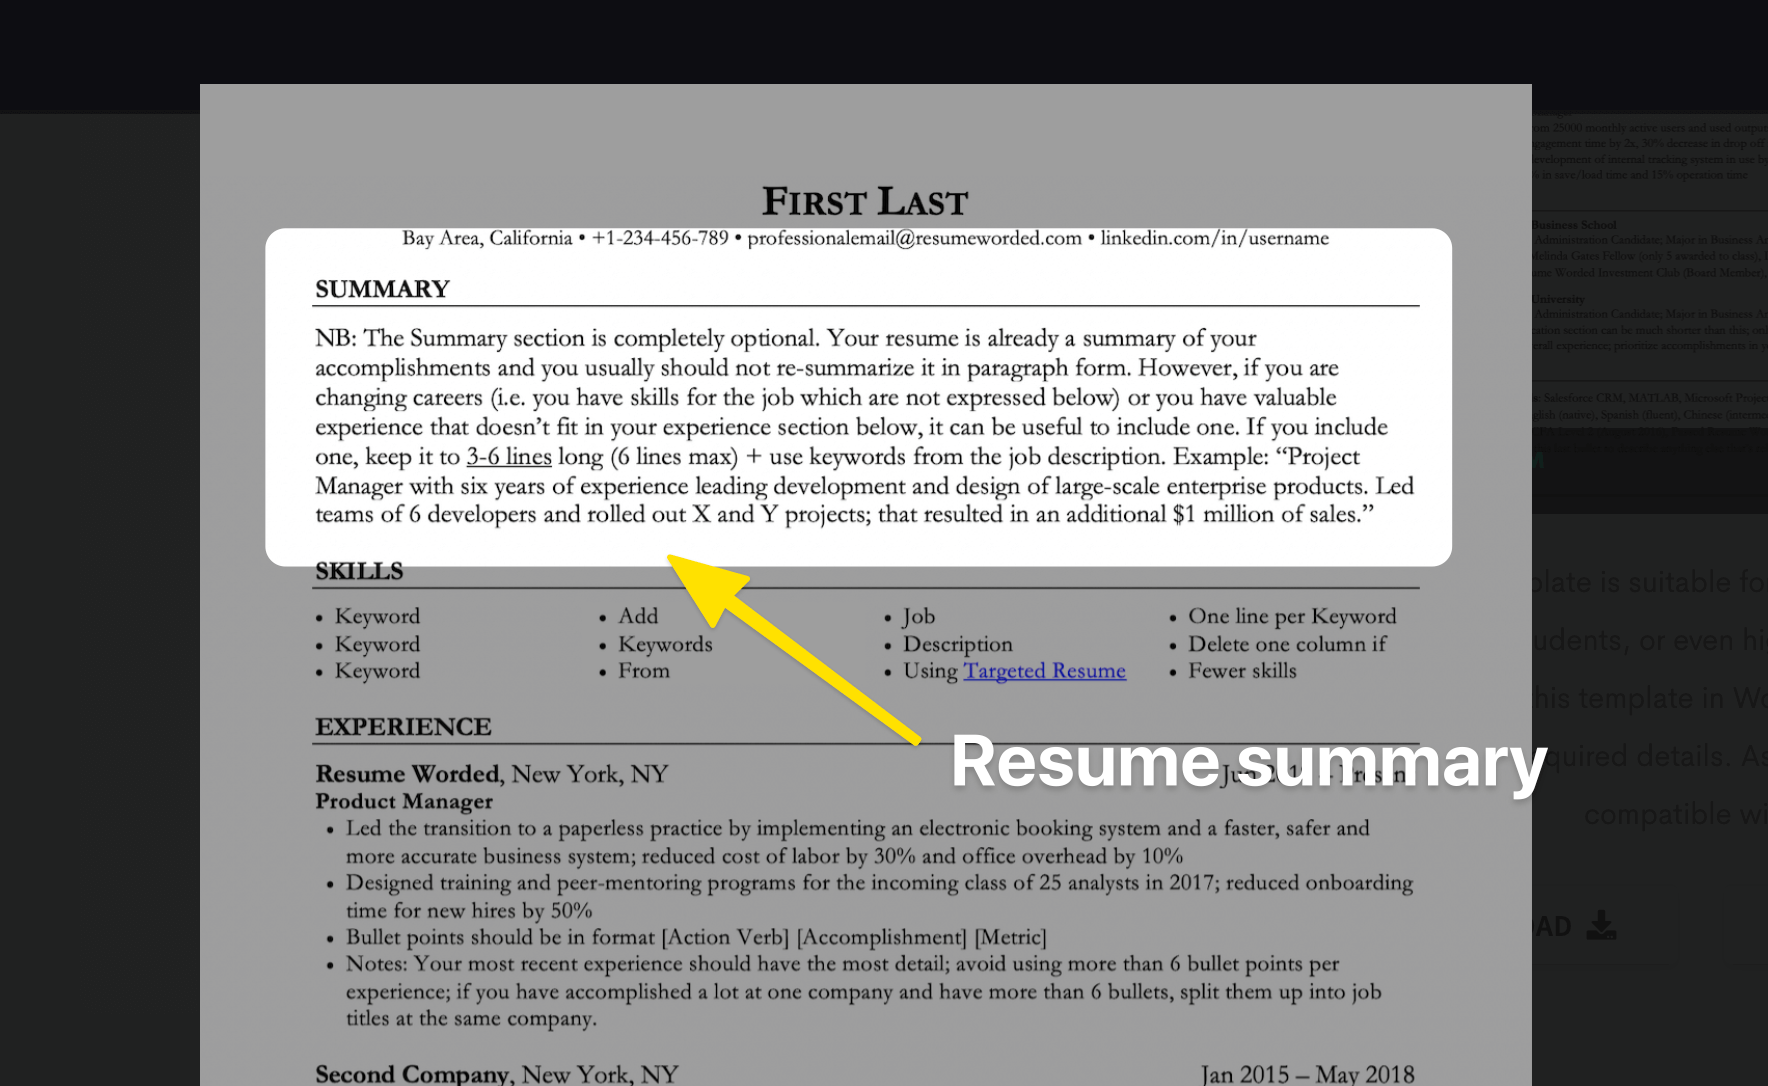 Resume writing service Stats: These Numbers Are Real